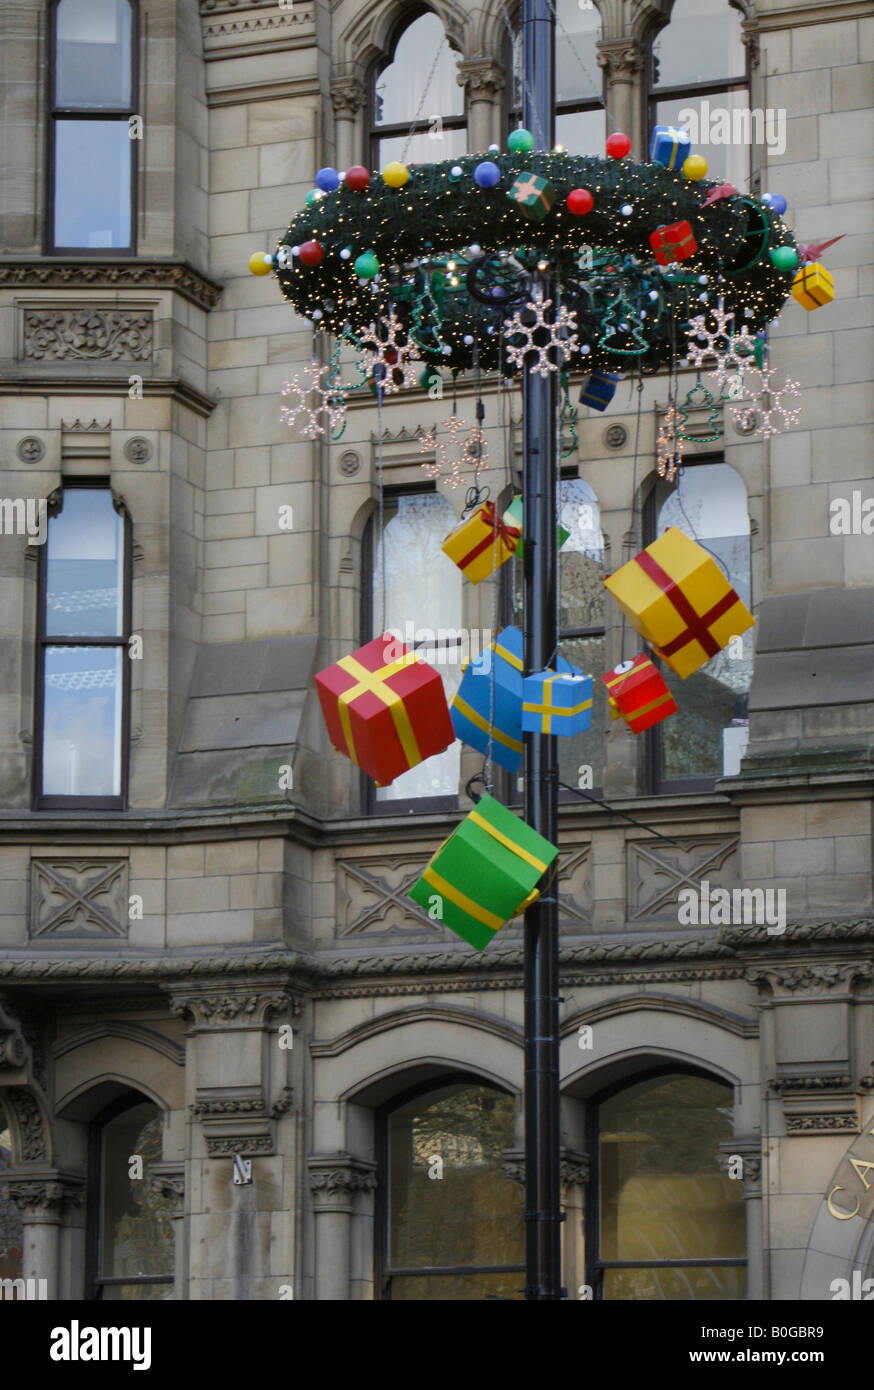 Christmas decorations in Manchester city centre - Christmas 2007 Stock Photo